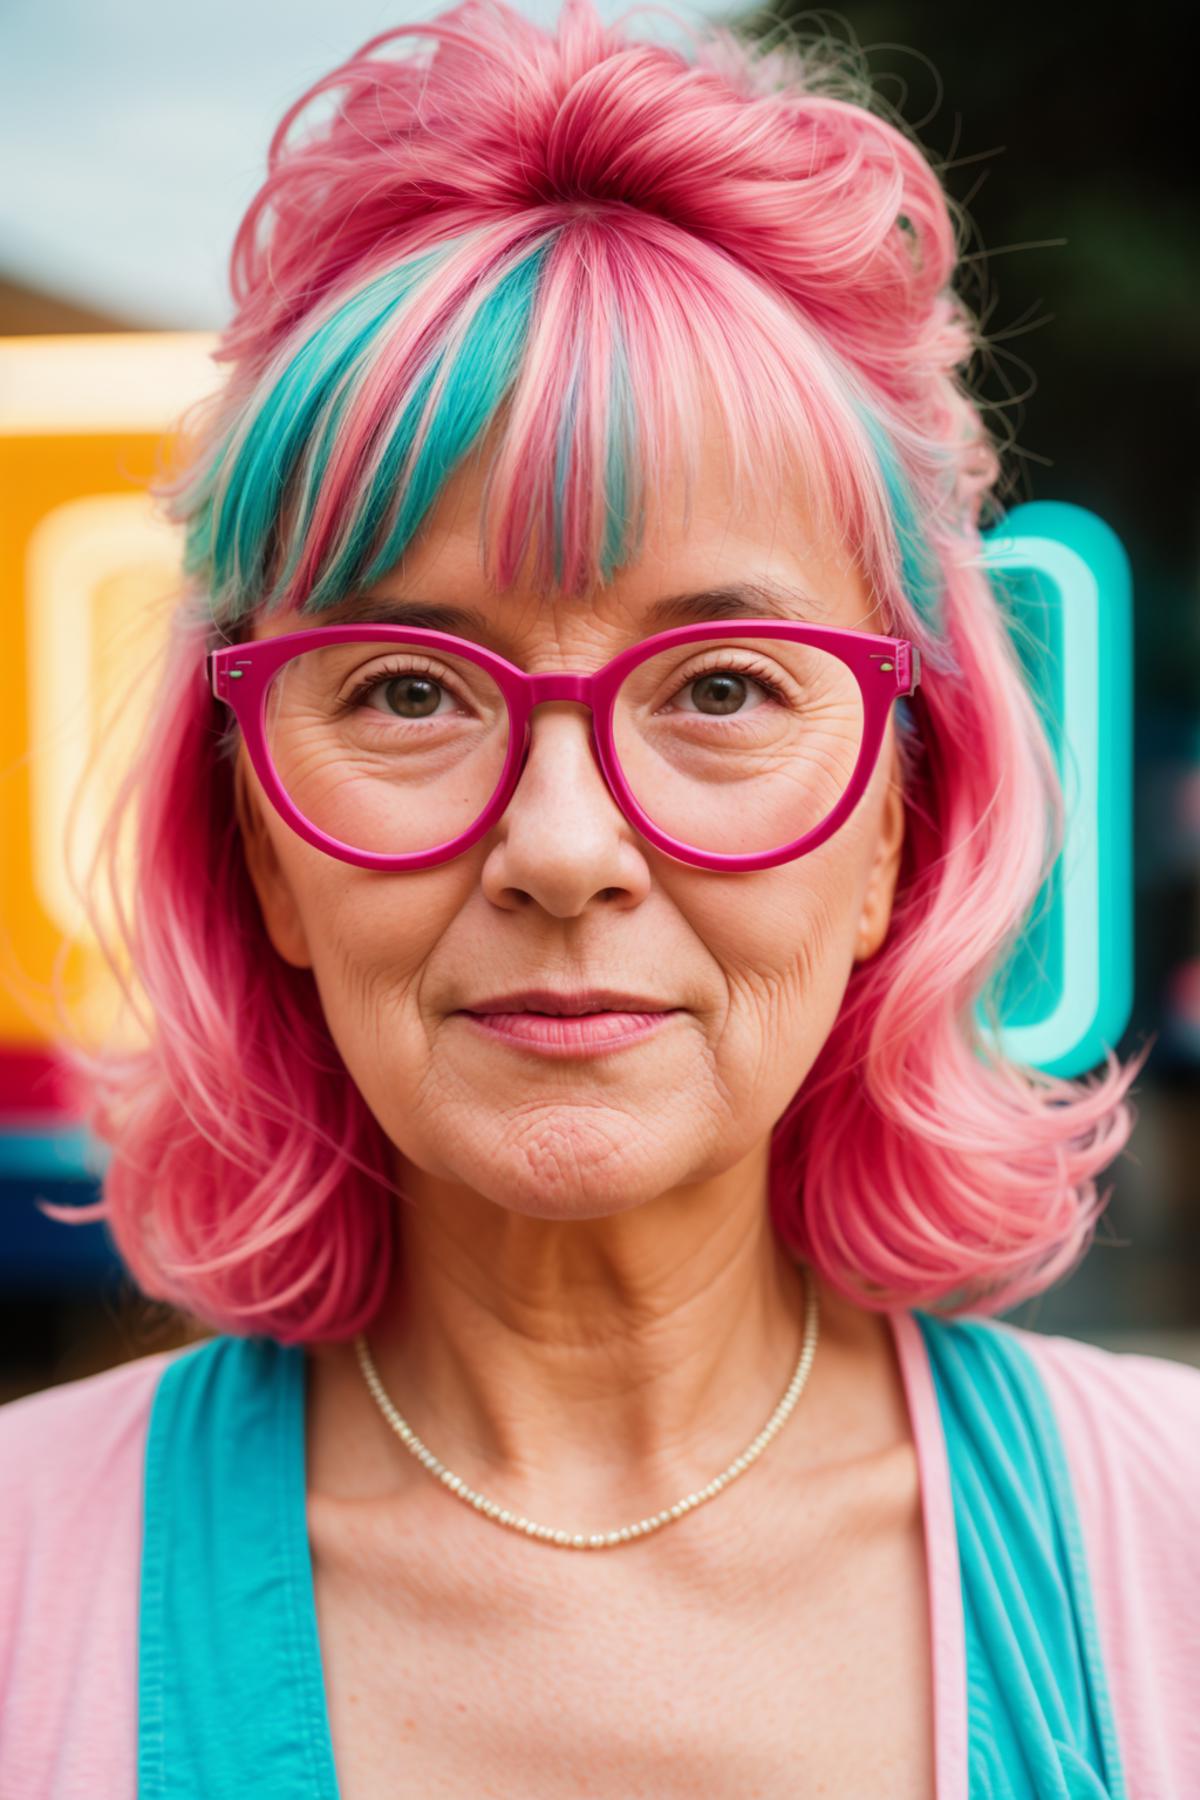 The image features a woman with pink hair, wearing pink glasses and a pink top. She is smiling and appears to be in a cheerful mood. The woman's hair is styled in a bun, and she is wearing a necklace. The scene is set against a colorful background, which adds to the vibrant and lively atmosphere of the image.